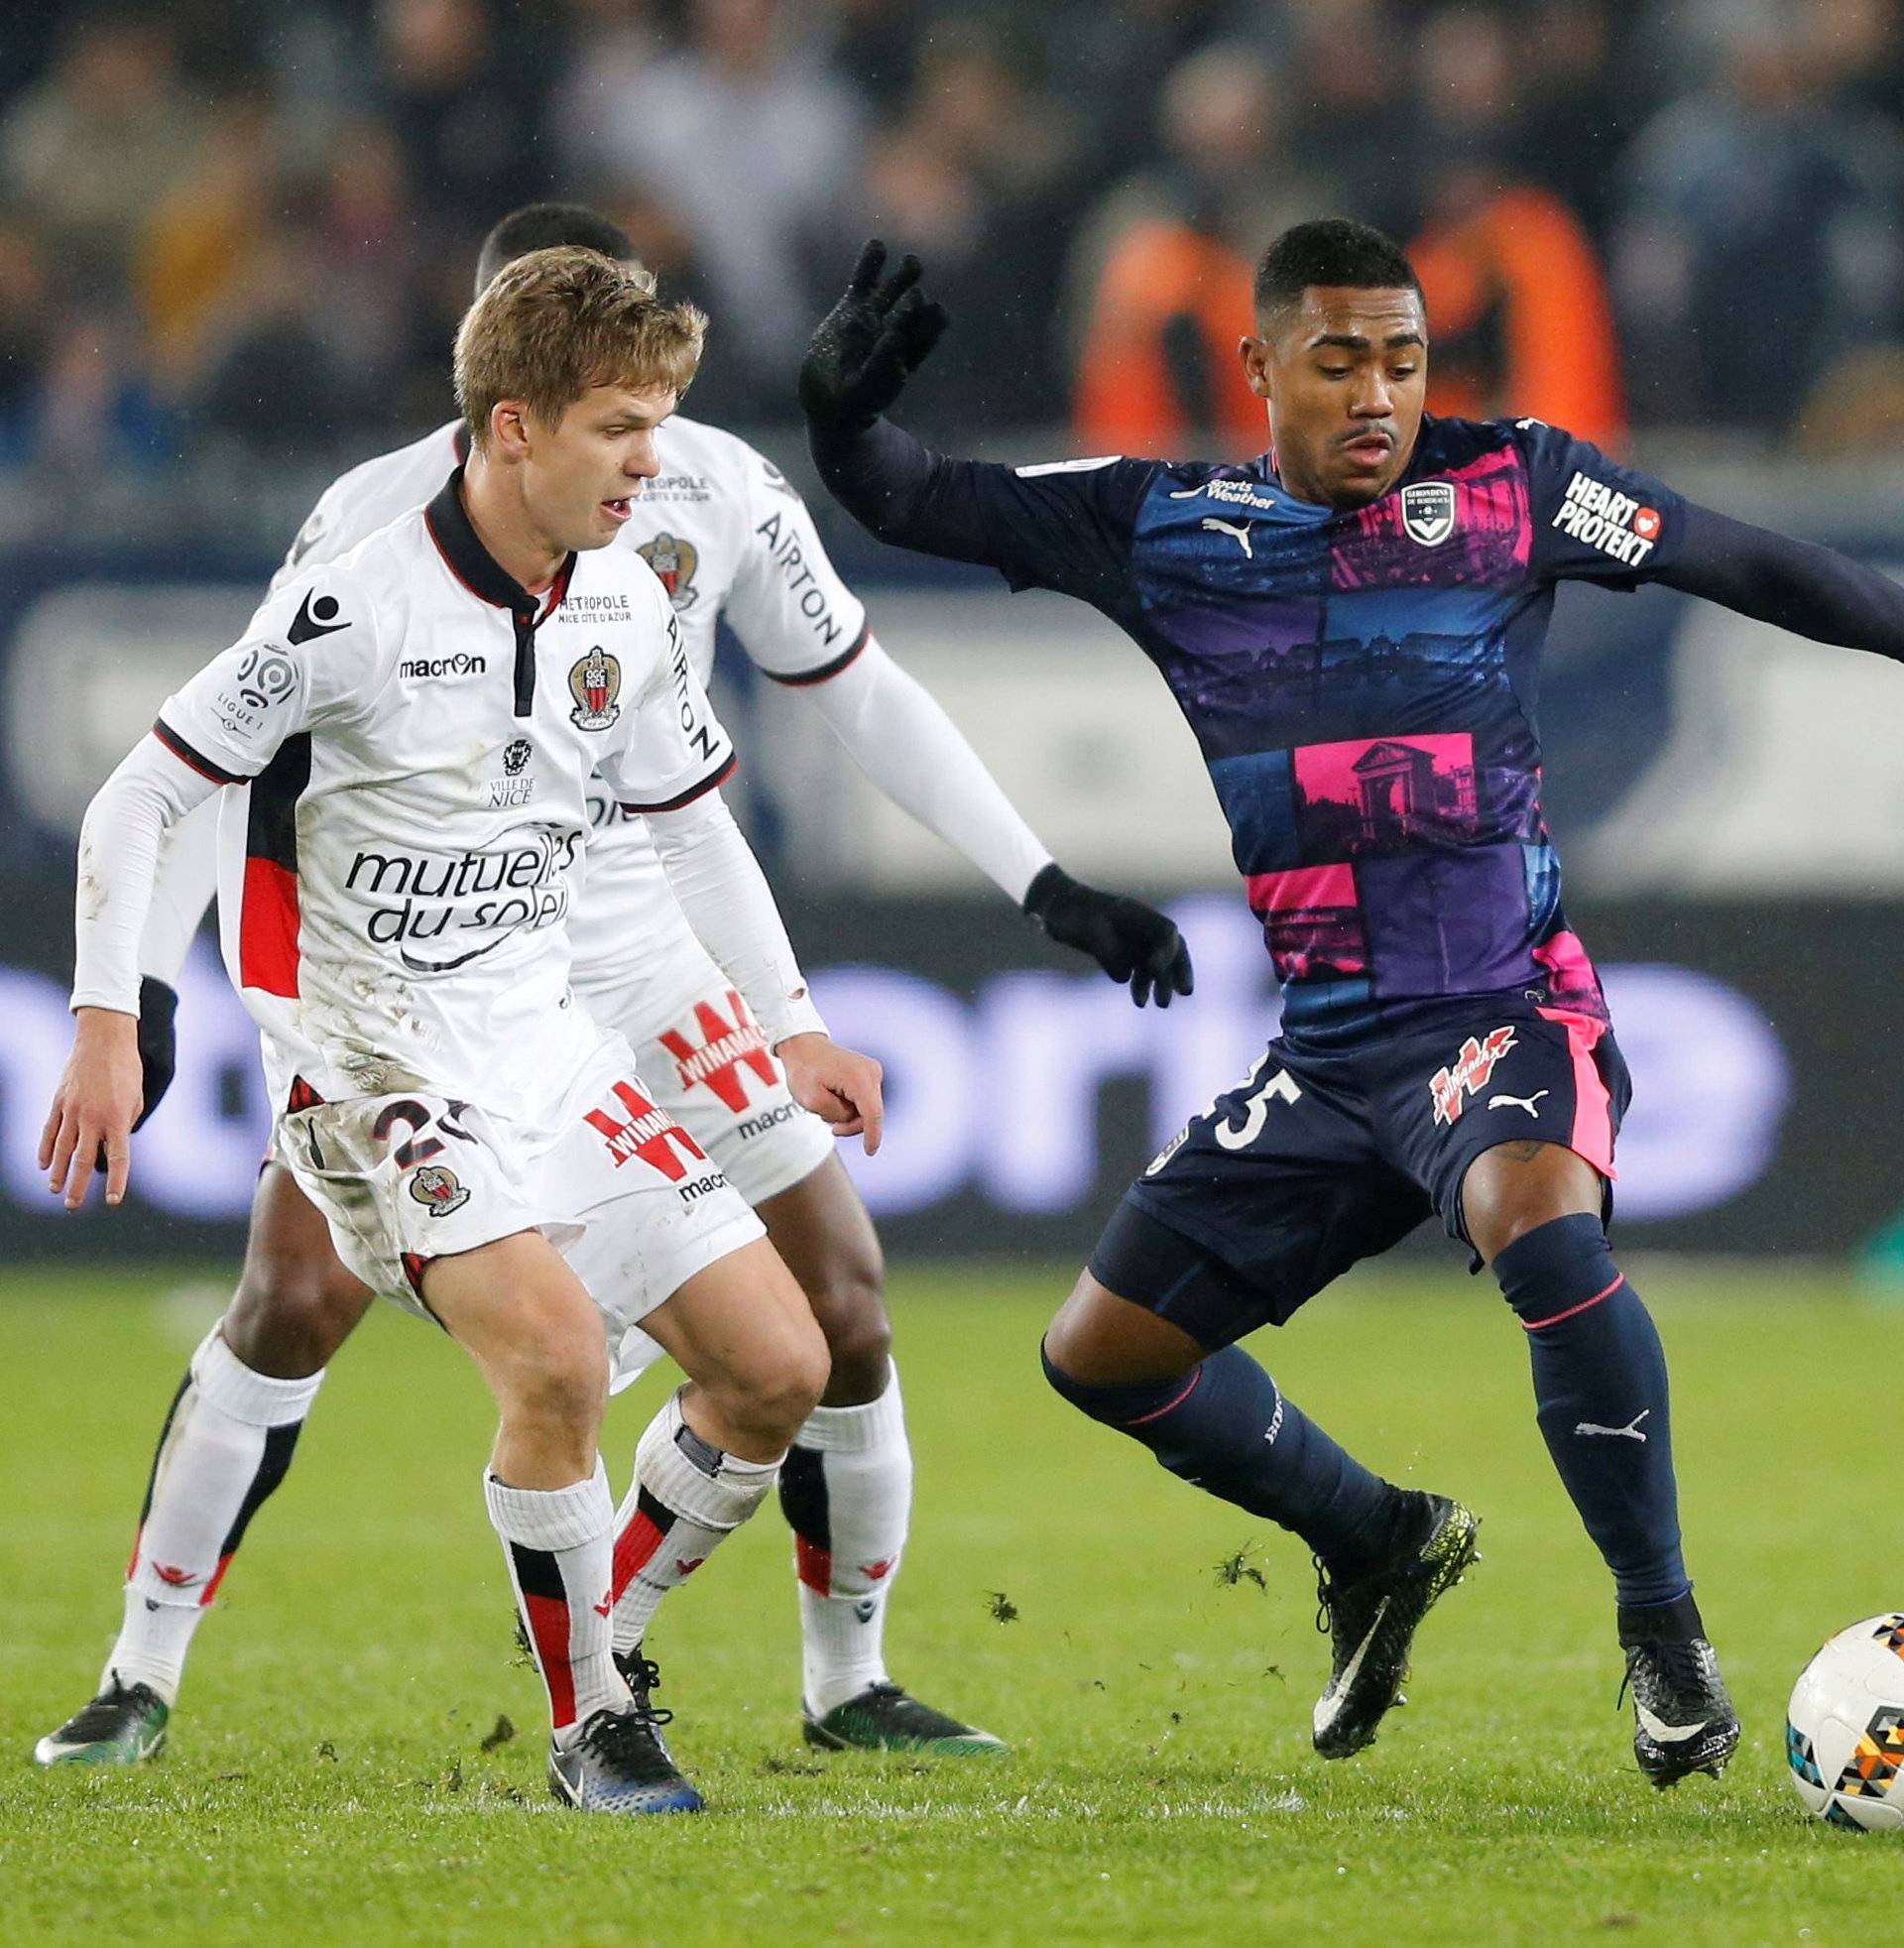 FILE PHOTO: Malcom of Girondins Bordeaux (C) in Ligue 1 action against Nice at Stade Matmut Atlantique, 21/12/2016